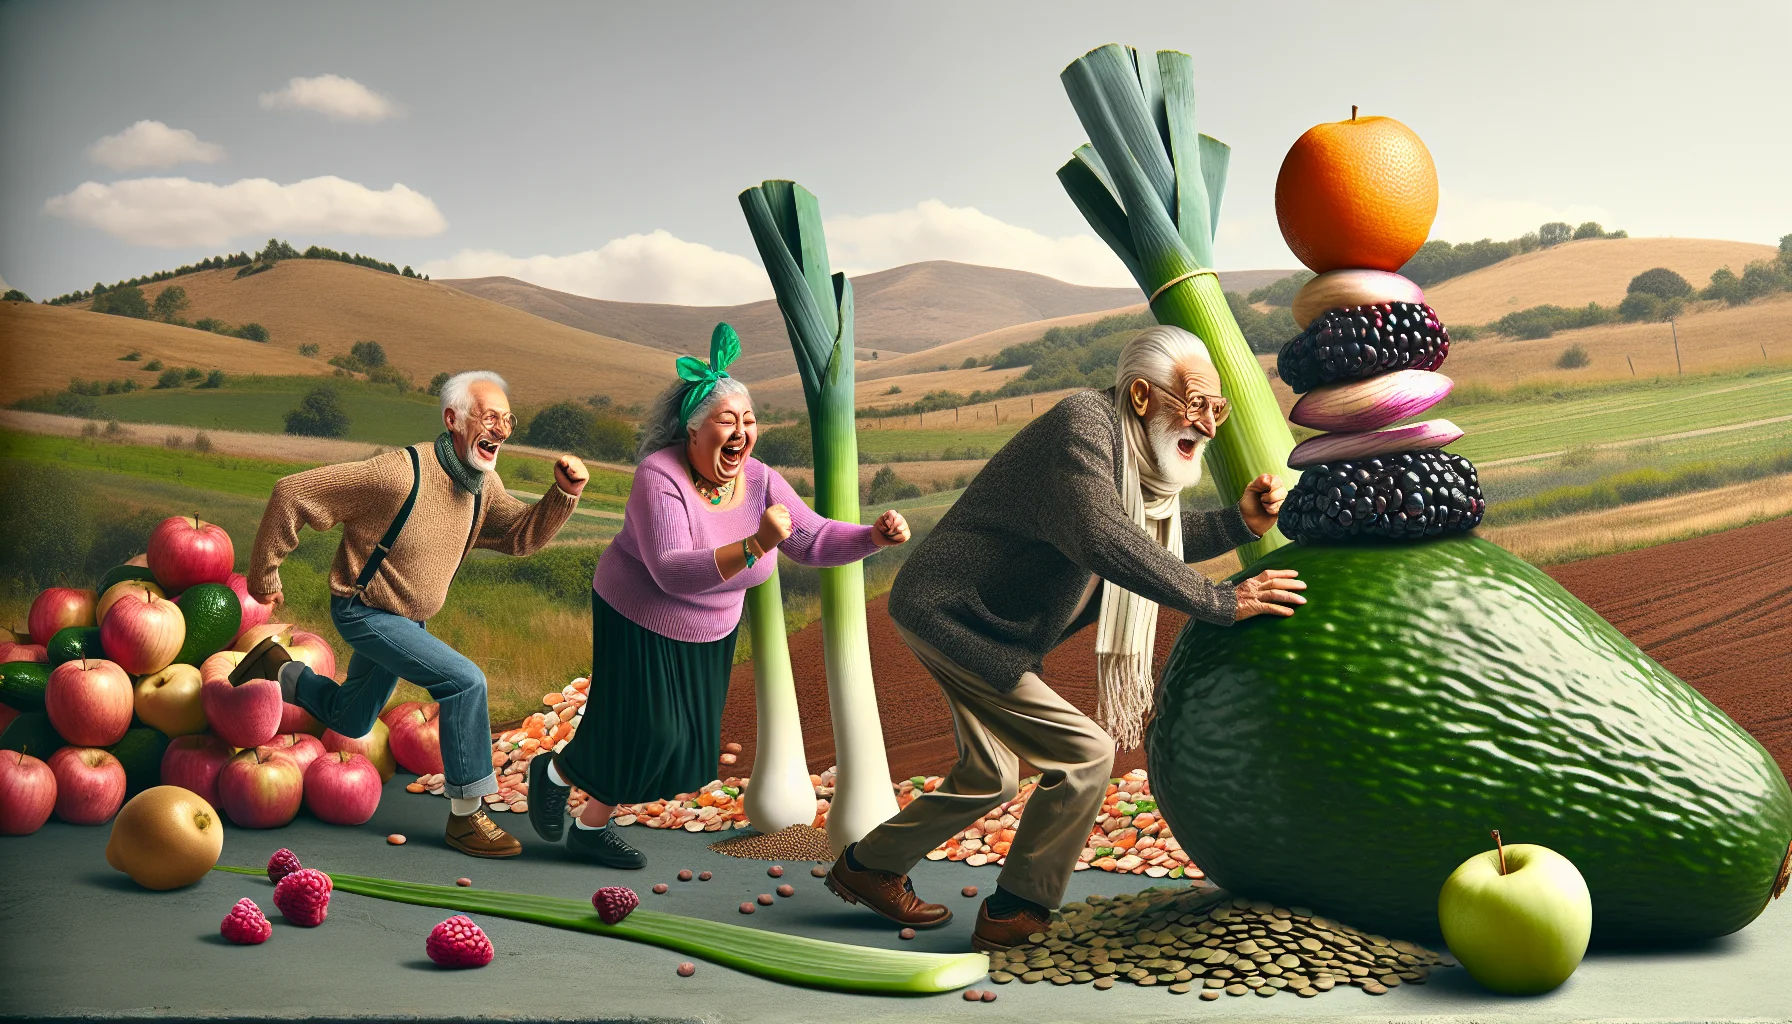 Create a humorous scene of ancient people partaking in a weight-loss journey, The scenery is saturated with high-fiber foods like avocados, lentils, and blackberries. There's an older Hispanic woman in a jovial mood, chasing after a giant leek that is rolling downhill. Another elderly man, who is Caucasian, is trying to balance a pyramid of apples on his head with a playful scowl. The older Black woman breaks into a fit of laughter as she zests an orange, and the zest takes the shape of a stylish hat. Amidst their weight loss pursuit, these elderlies display an endearing commitment to healthy eating.